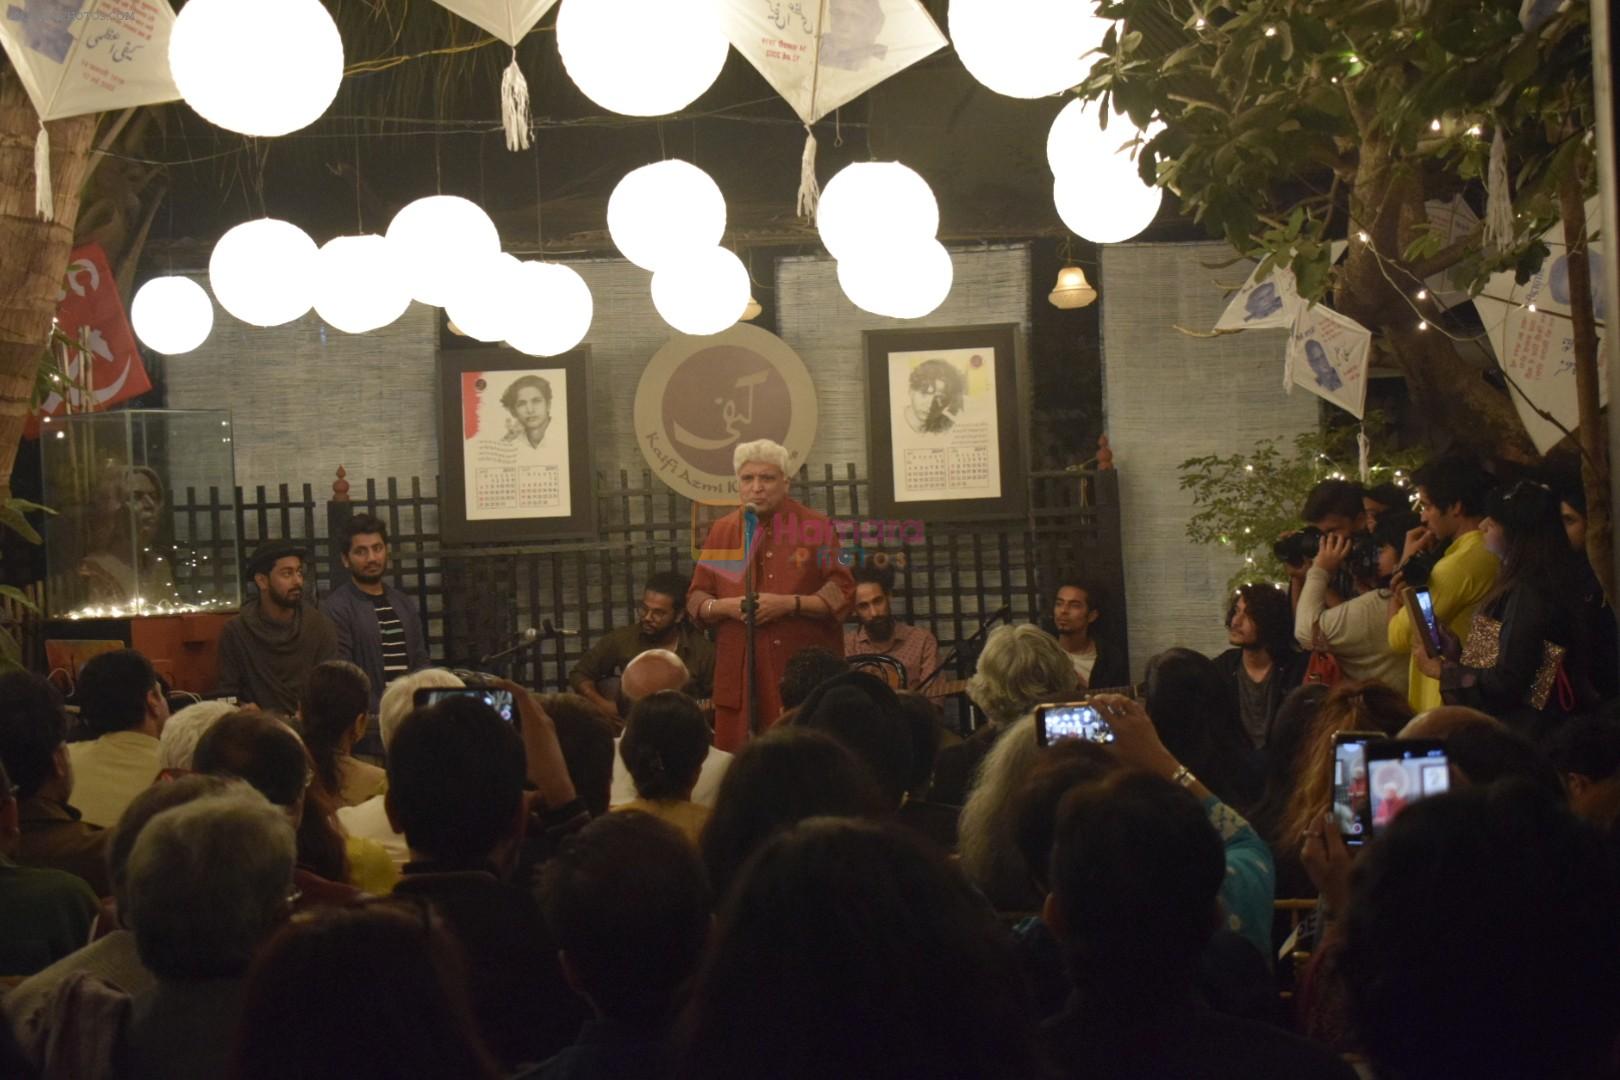 Javed AKhtar at Kaifi Azmi's centenary celebrations with a musical evening at his juhu residence on 10th Jan 2019